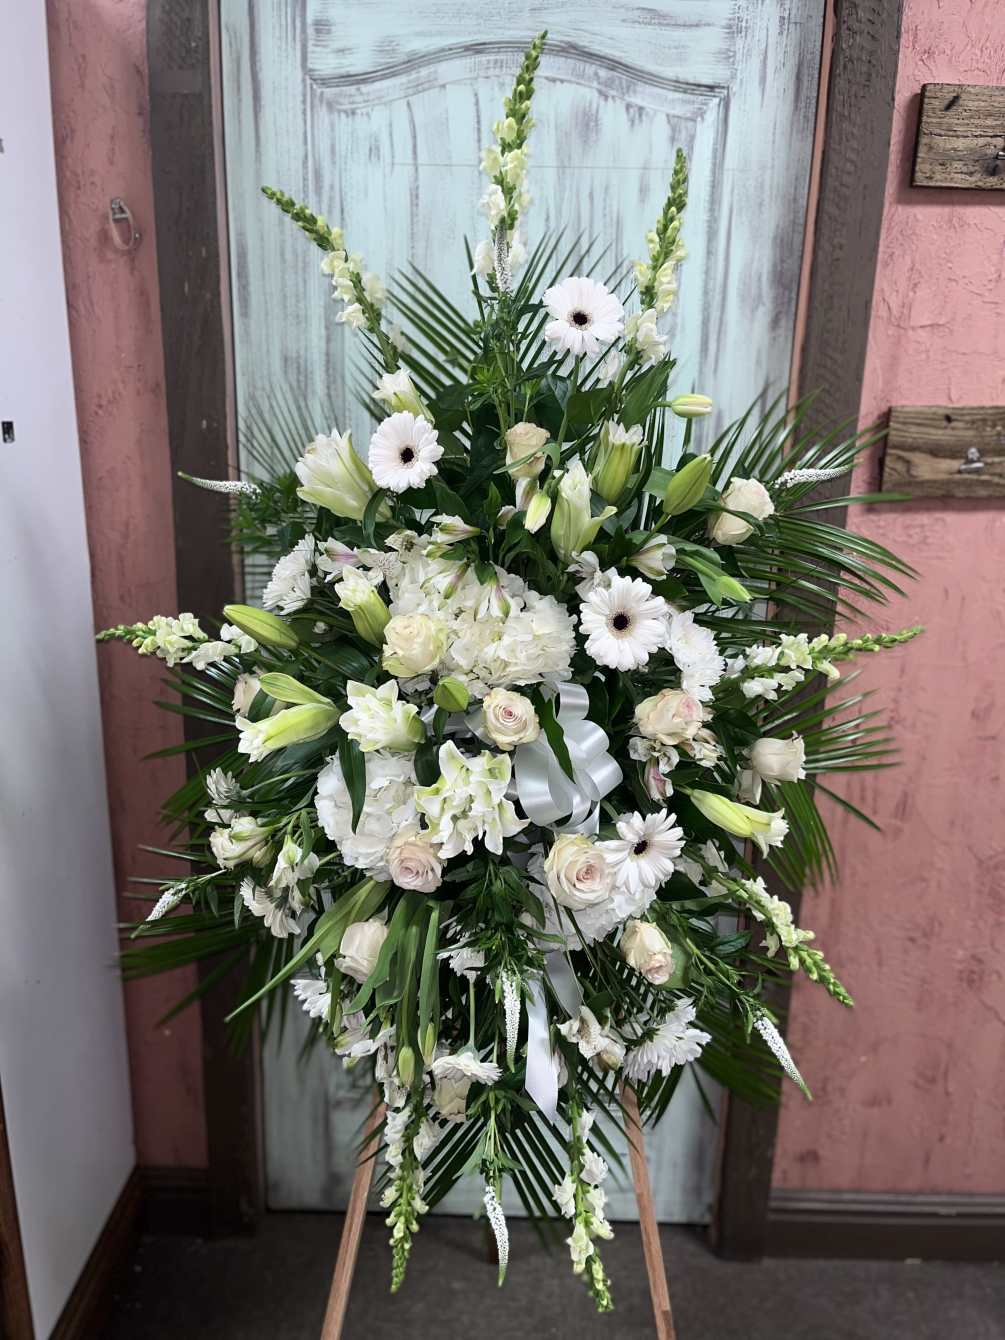 Type of Flowers: All White Premium Flowers with .
Availability: All year round
Design